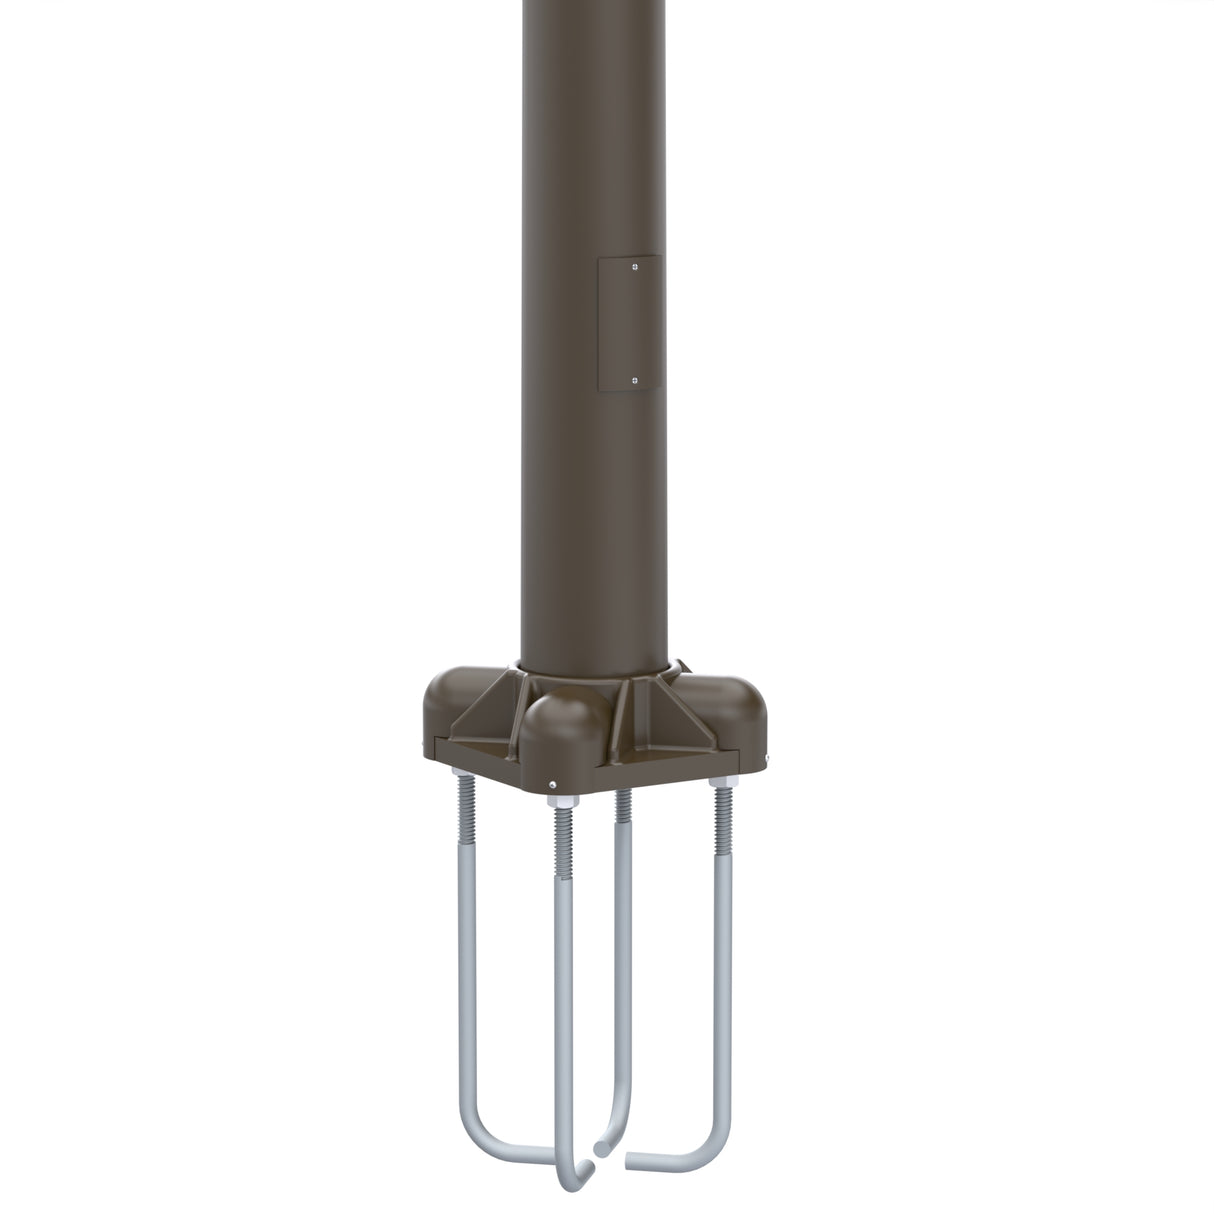 20' Tall x 6.0" Base OD x 4.0" Top OD x 0.188" Thick, Round Tapered Aluminum, Anchor Base Light Pole with 8' Davit Arm